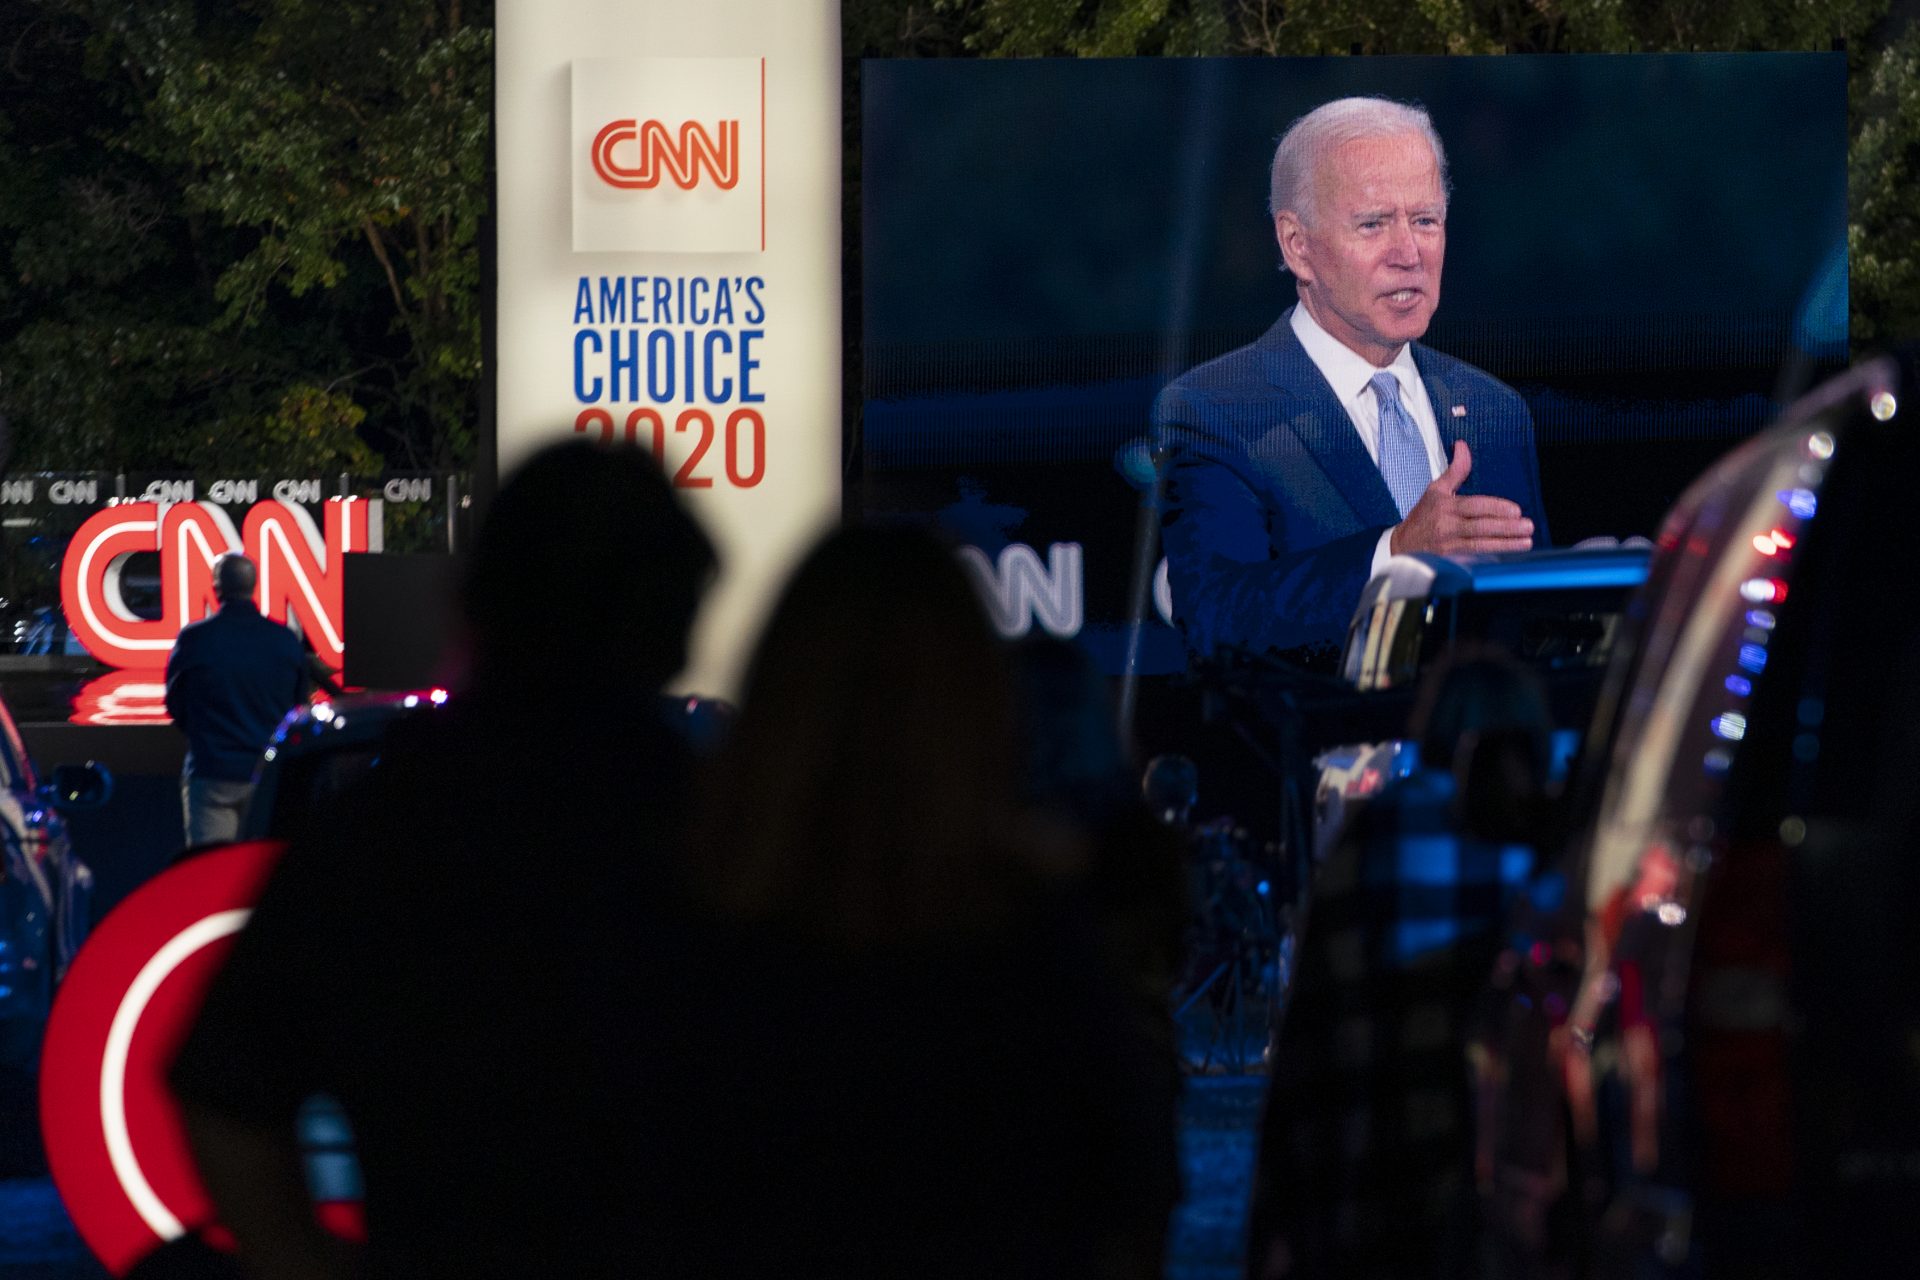 Audience members watch from their cars as Democratic presidential candidate former Vice President Joe Biden, seen on a monitor, speaks during a CNN town hall in Moosic, Pa., Thursday, Sept. 17, 2020.